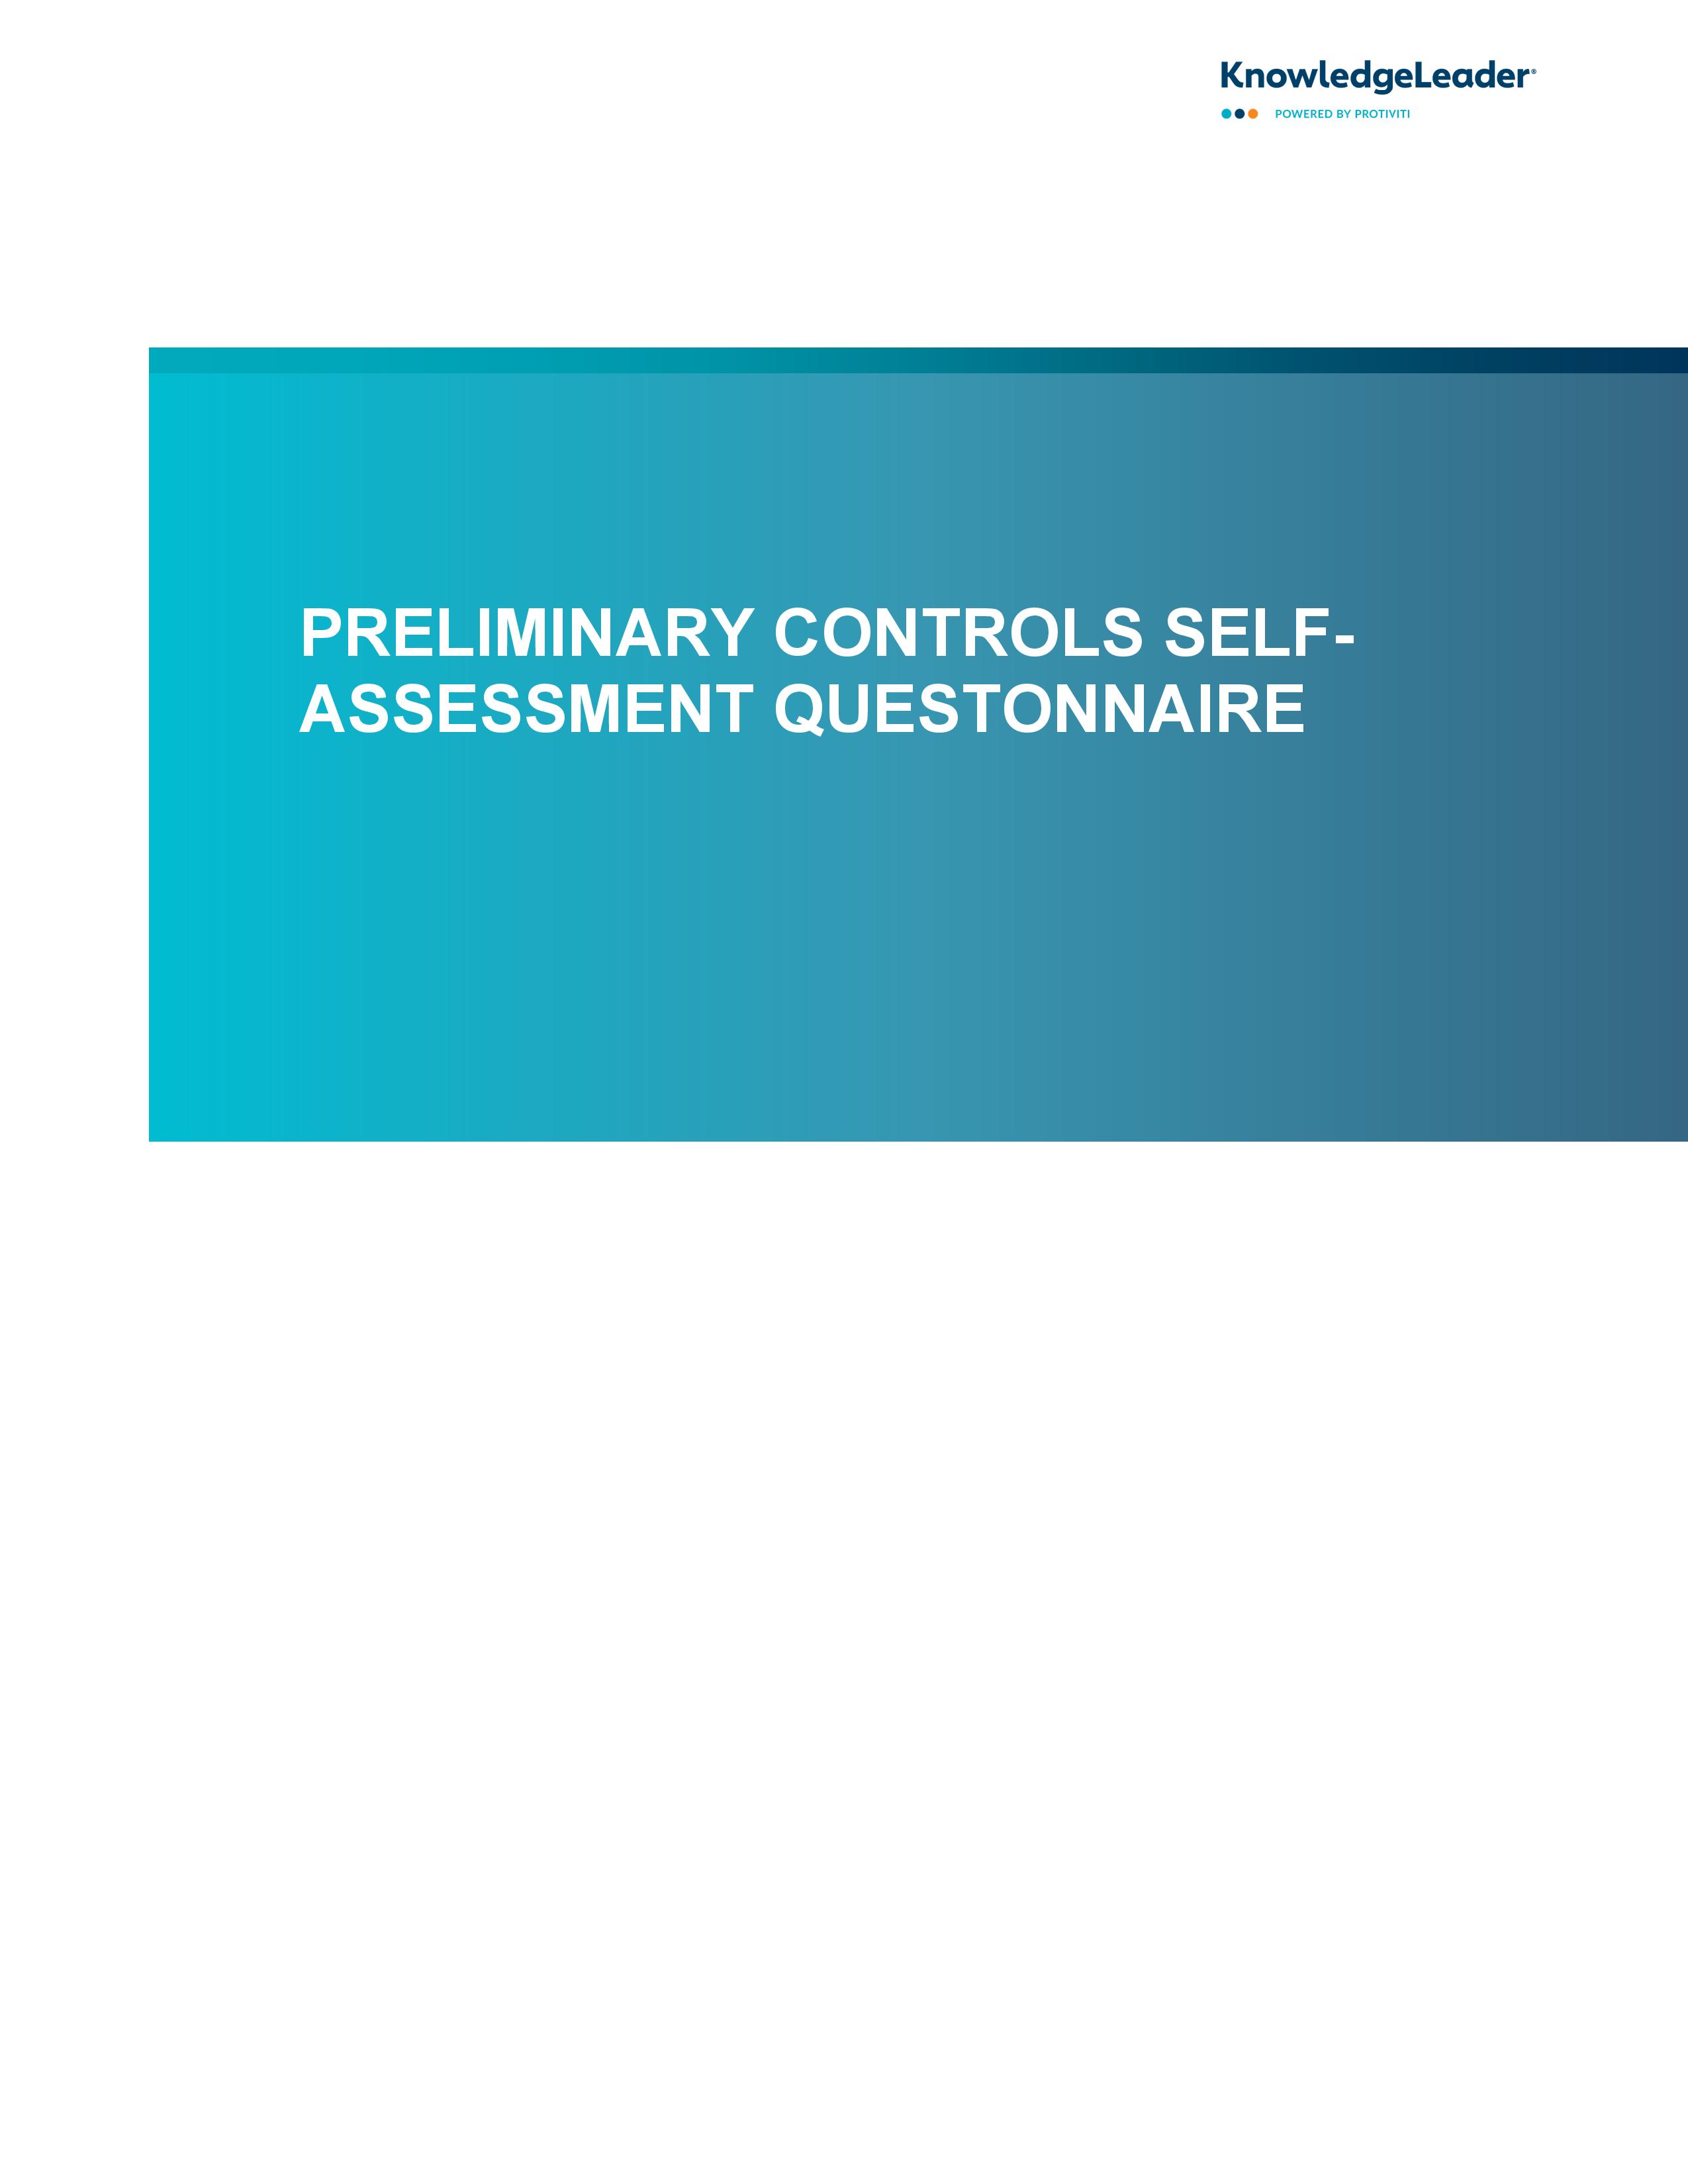 Screenshot of the first page of Preliminary Controls Self-Assessment Questionnaire